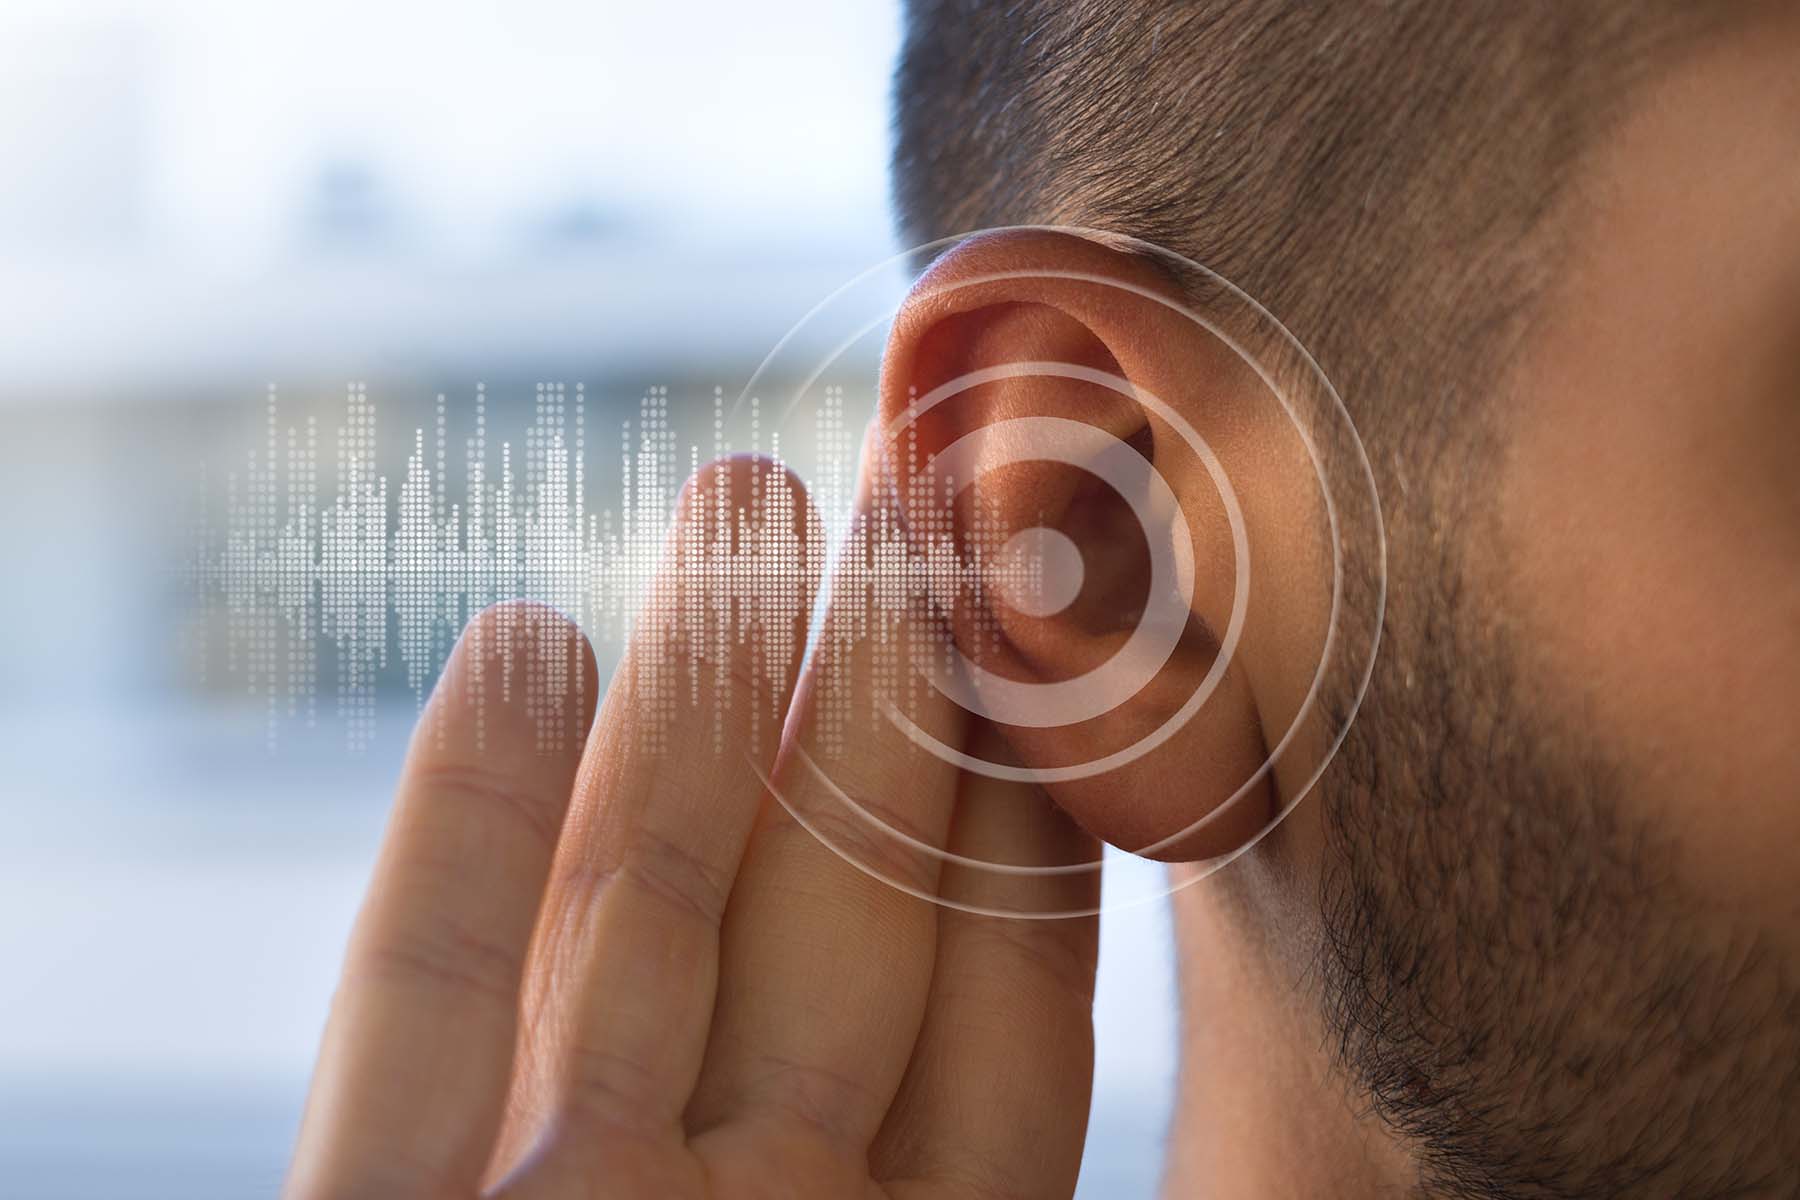 Close up of a young man holding his hand to his hear to hear better. Graphic of sound waves overlaid on image.